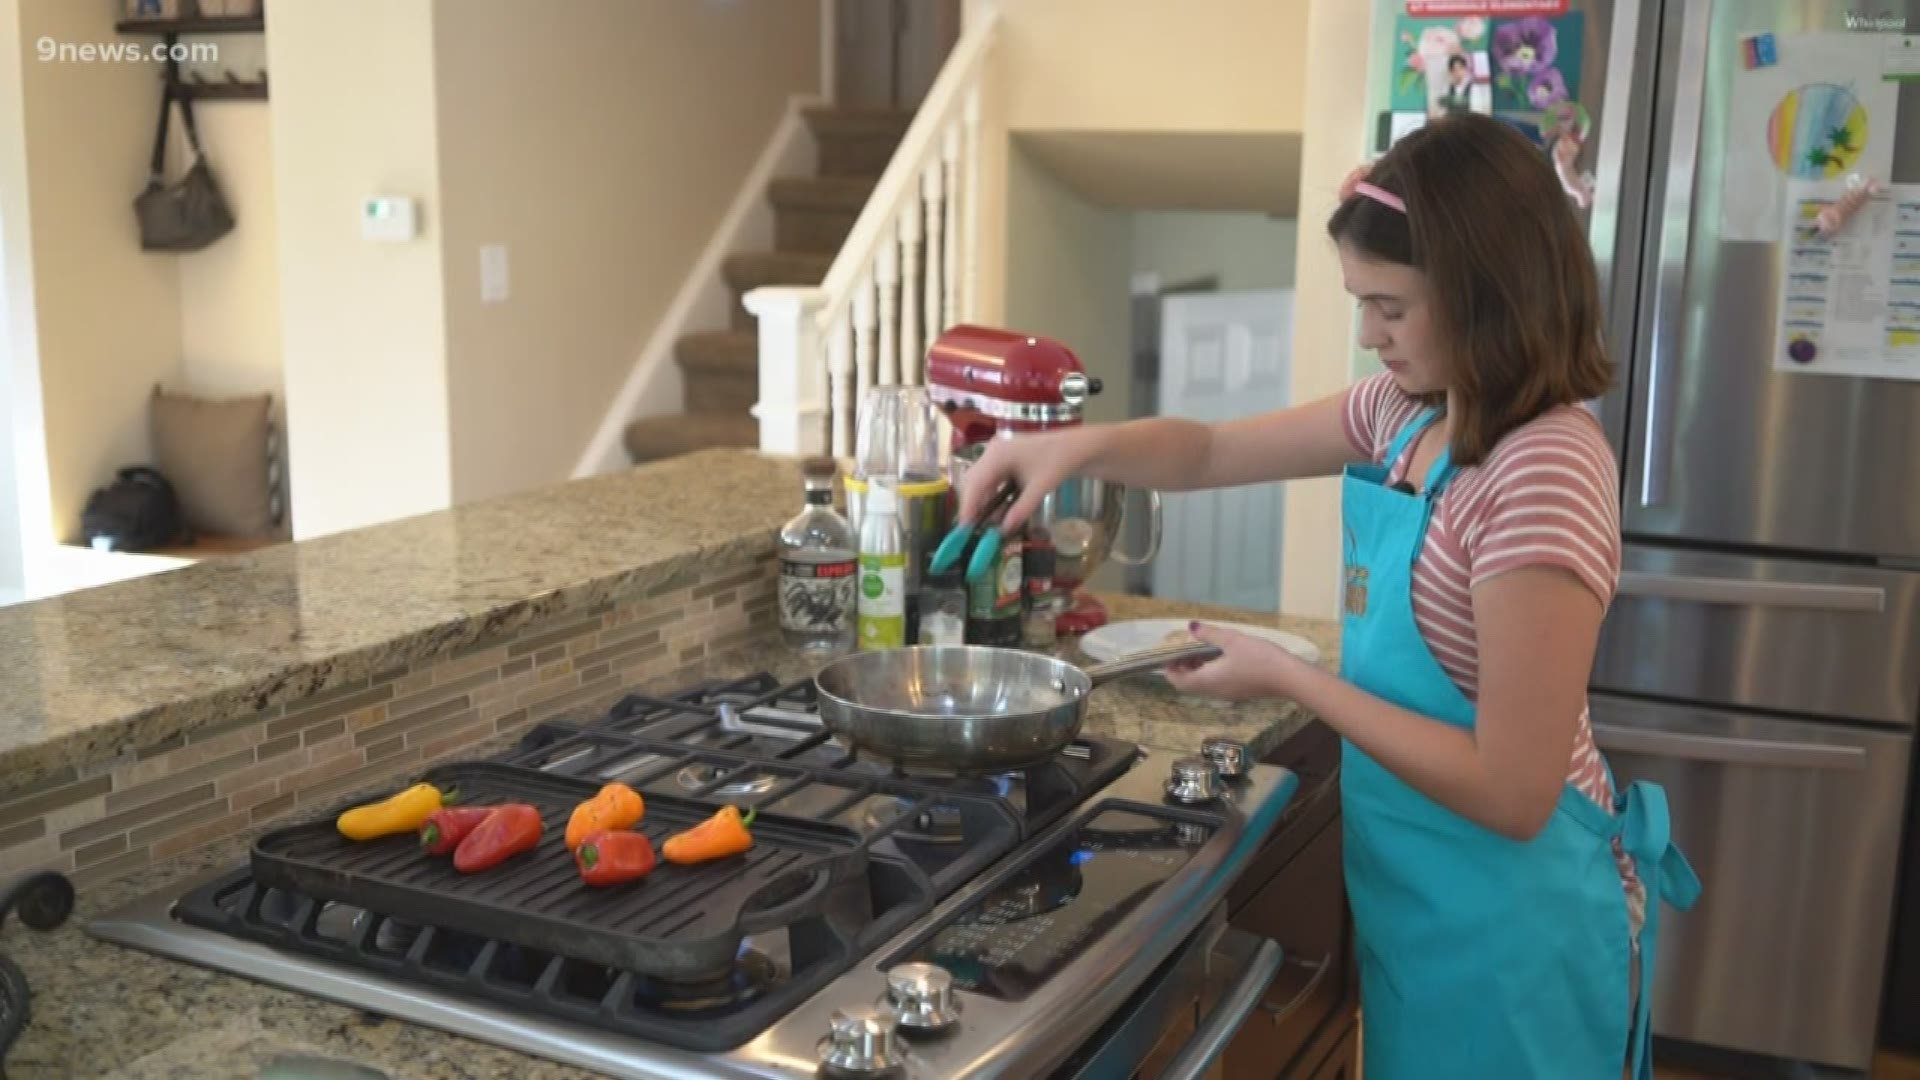 For Chef Adeline, a seventh grader in Jefferson County, cooking is far from a chore. It's a passion.